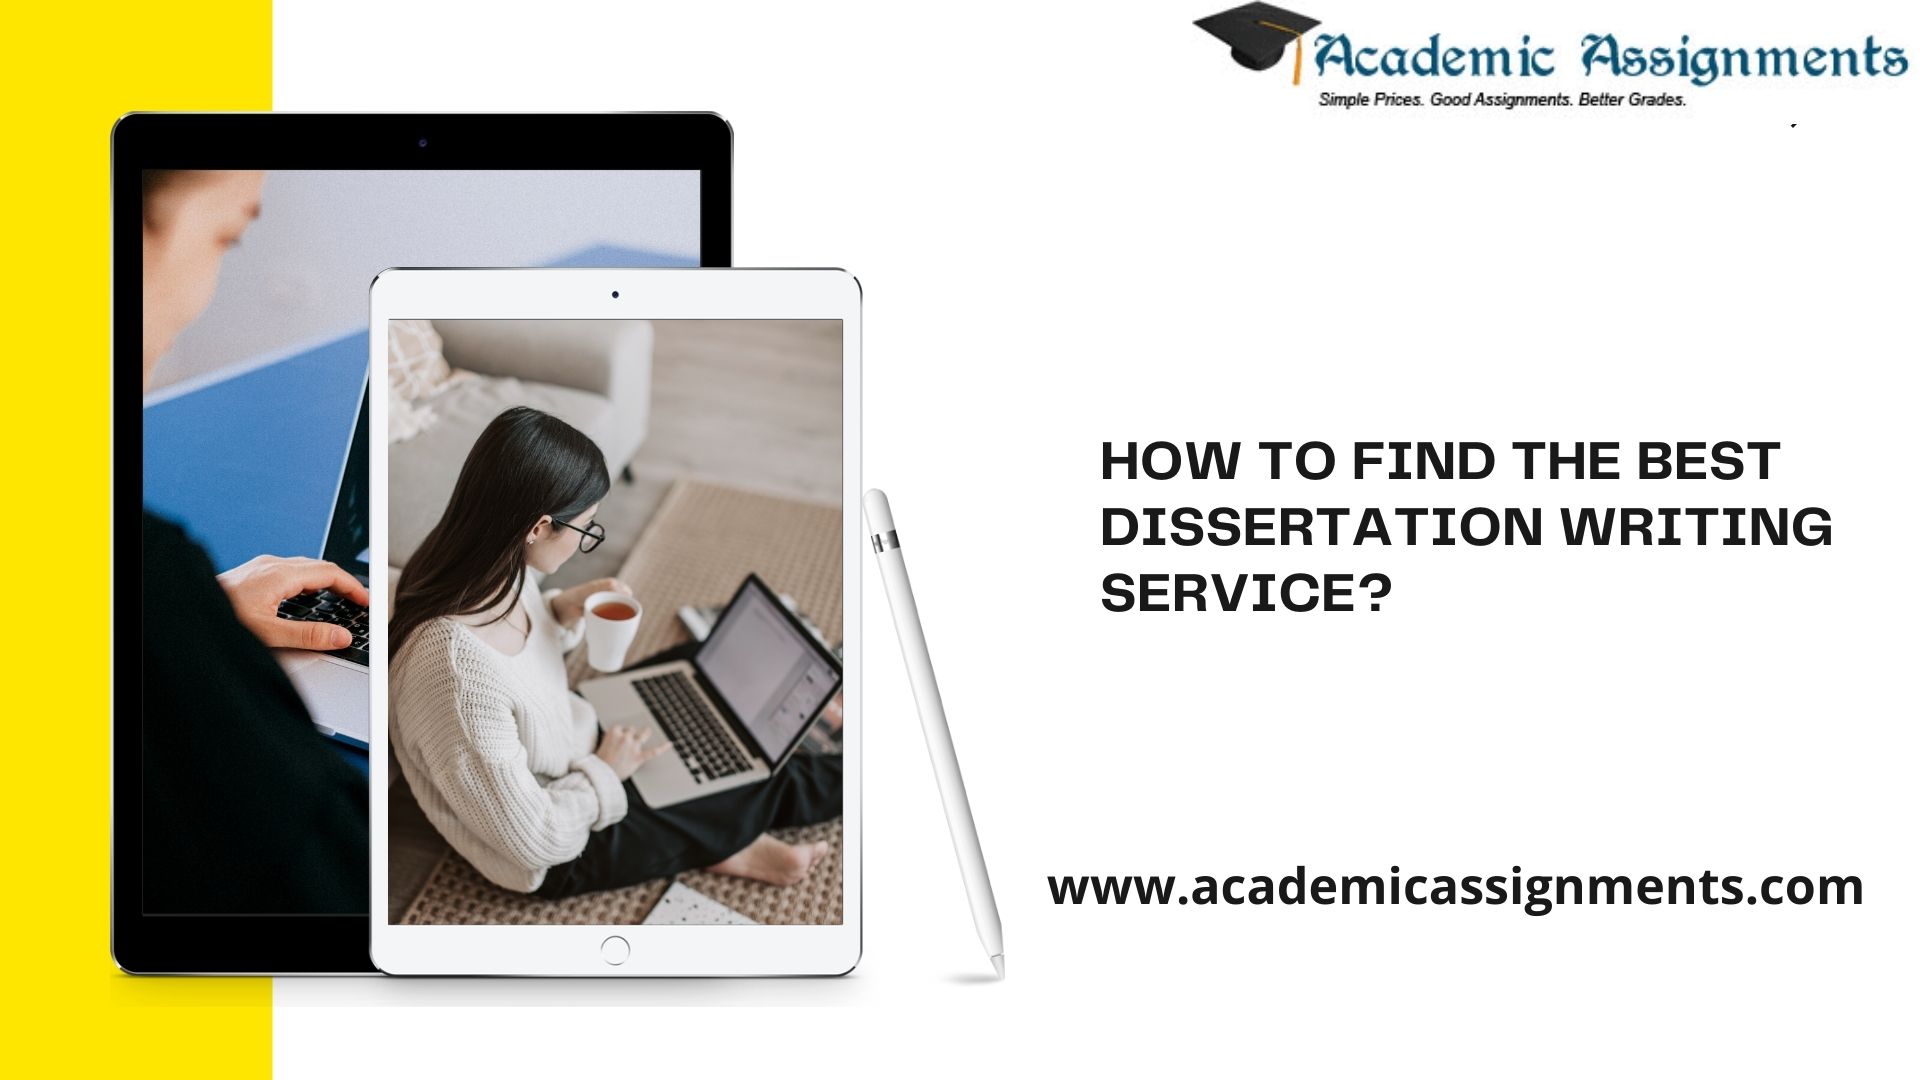 HOW TO FIND THE BEST DISSERTATION WRITING SERVICE